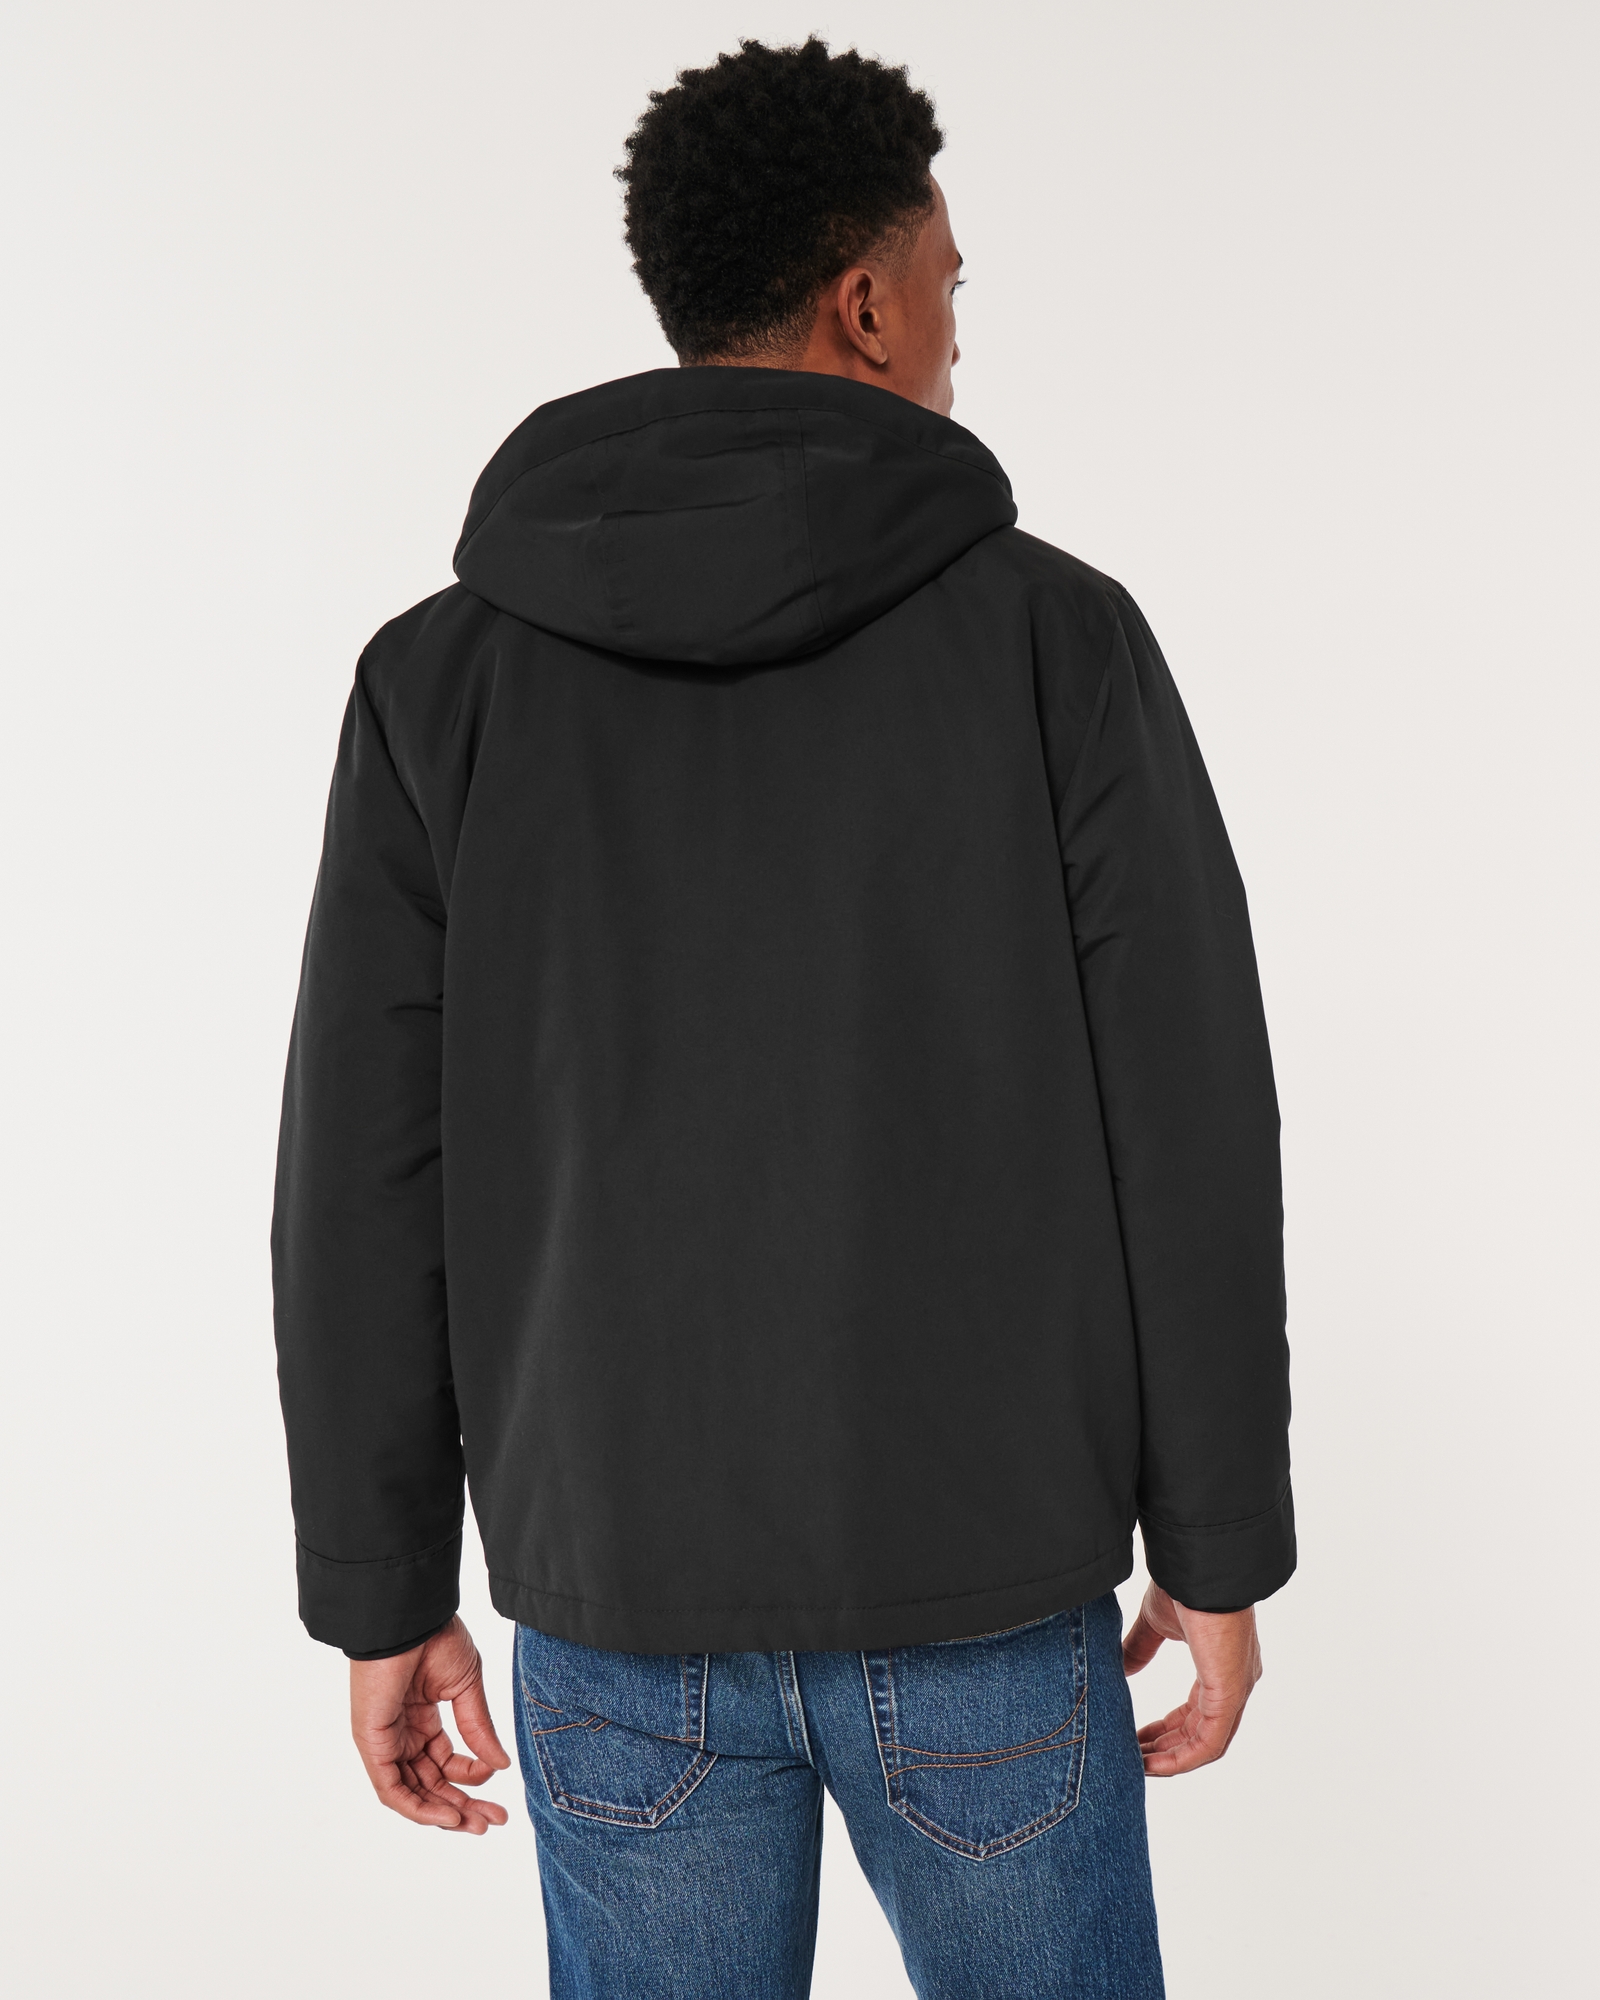 Hollister mens all-weather collection - Gem